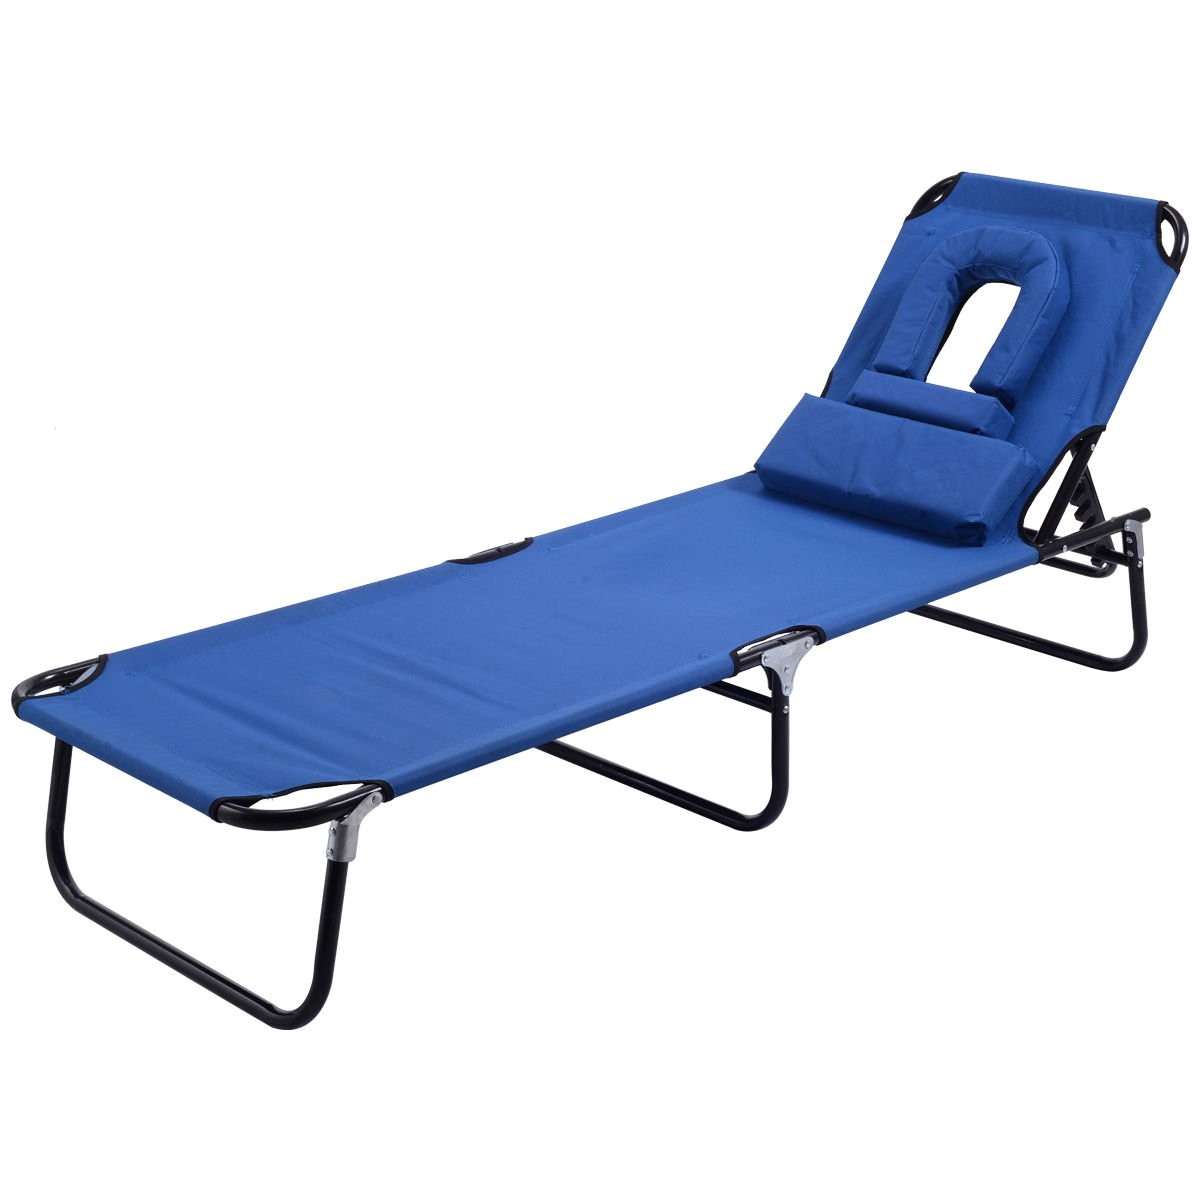 goplus folding chaise lounge chair bed outdoor patio beach camping recliner w hole for face pool yard blue